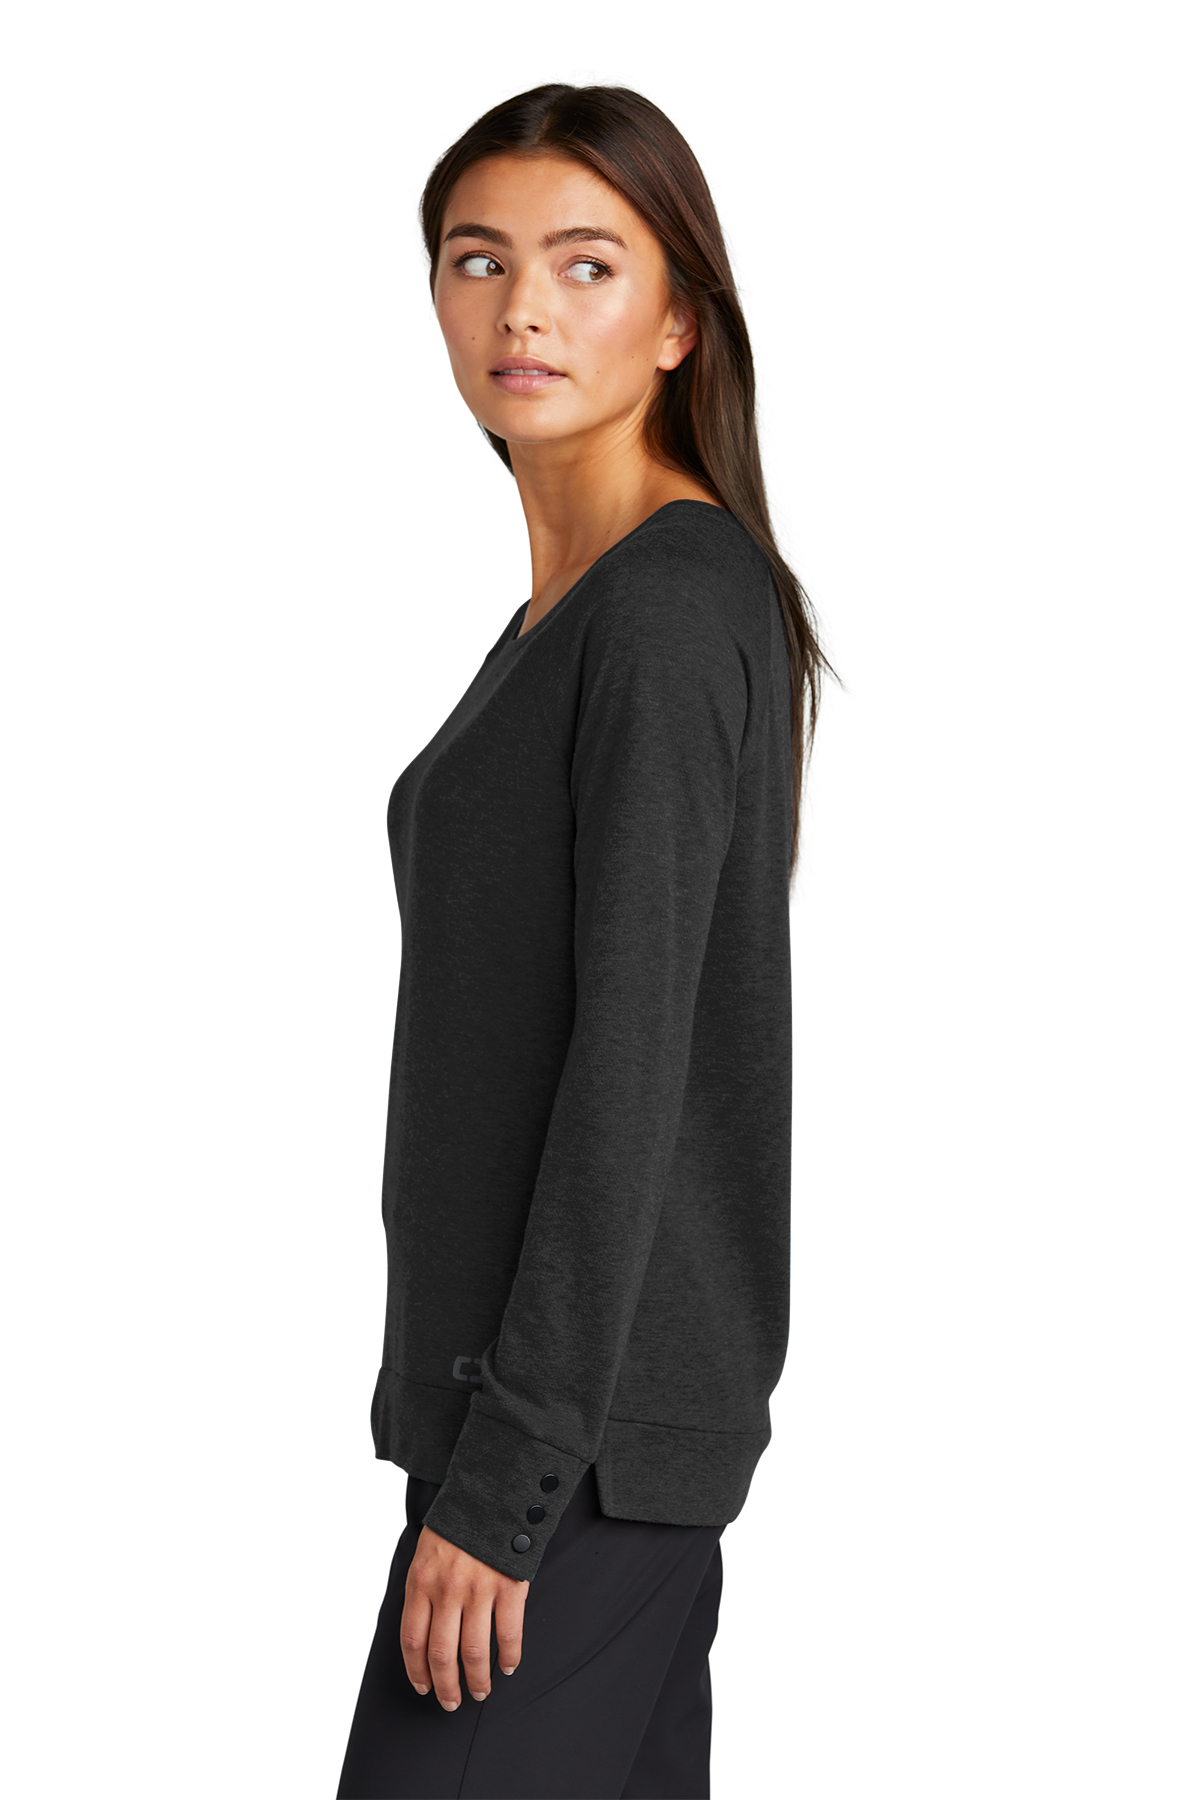 OGIO Ladies Command Long Sleeve Scoop Neck | Product | Company Casuals